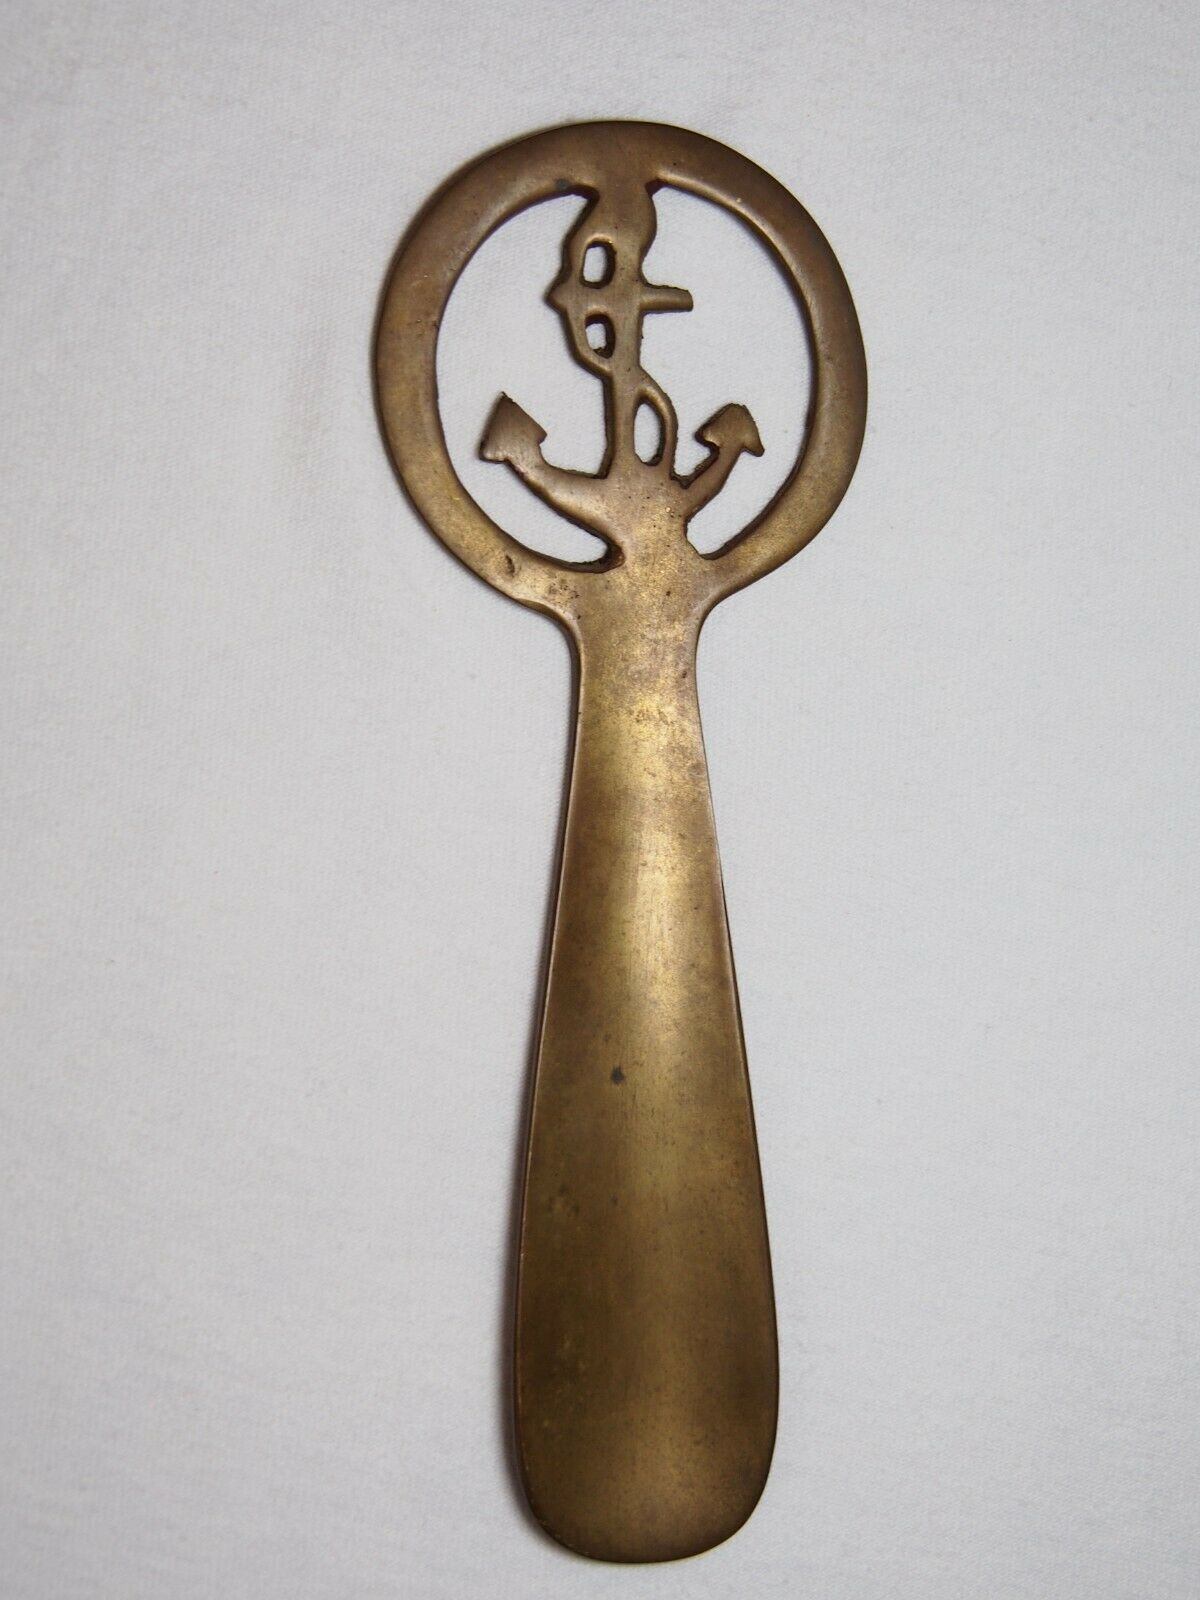 Vintage Brass Shoehorn With Anchor Handle 7 1/4" Long